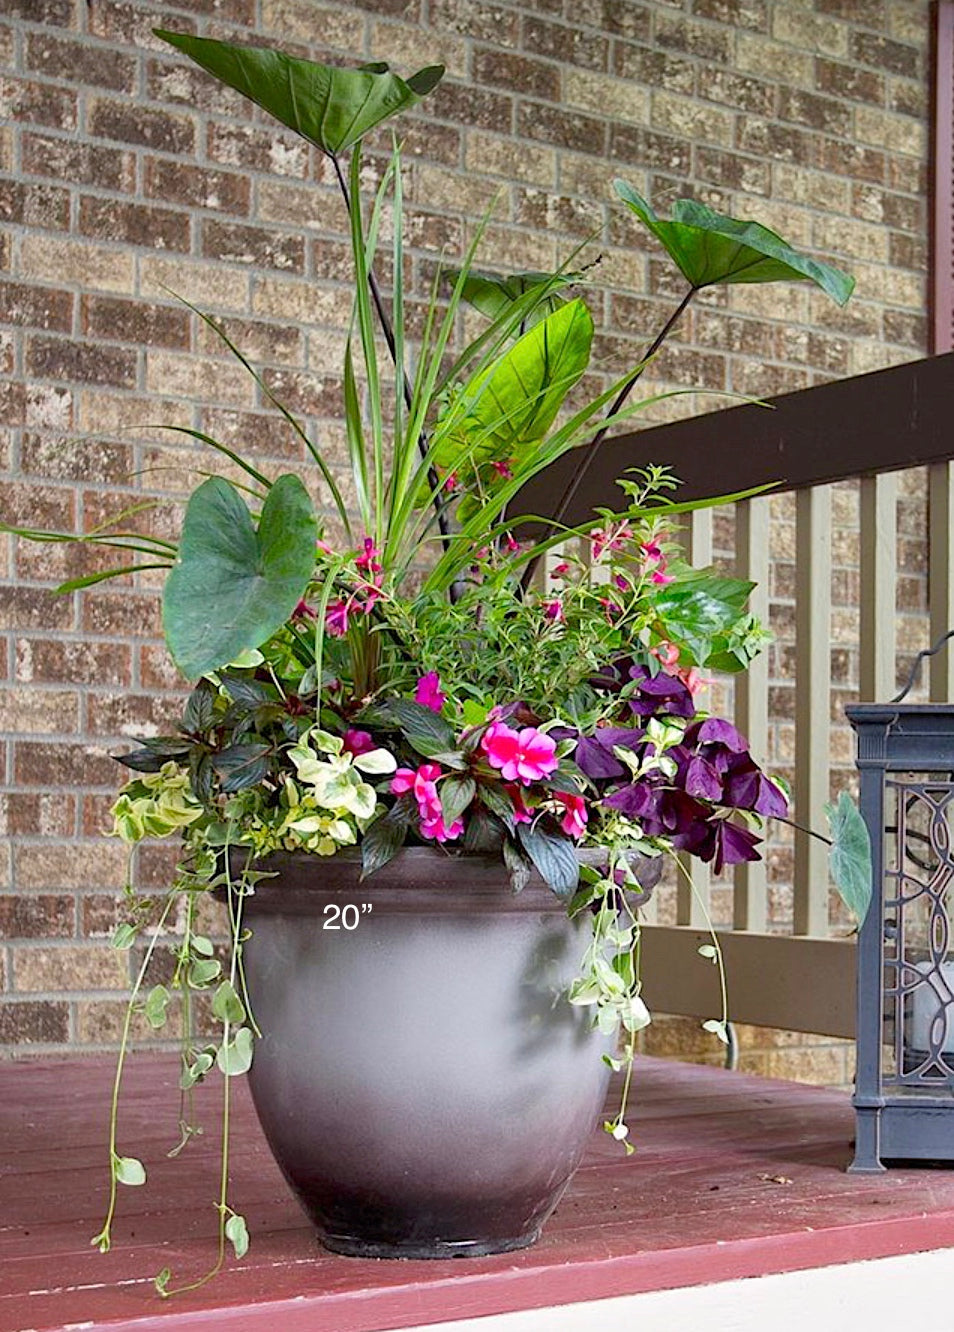 Planter Insert Delivery Subscription - Use Your Own Container